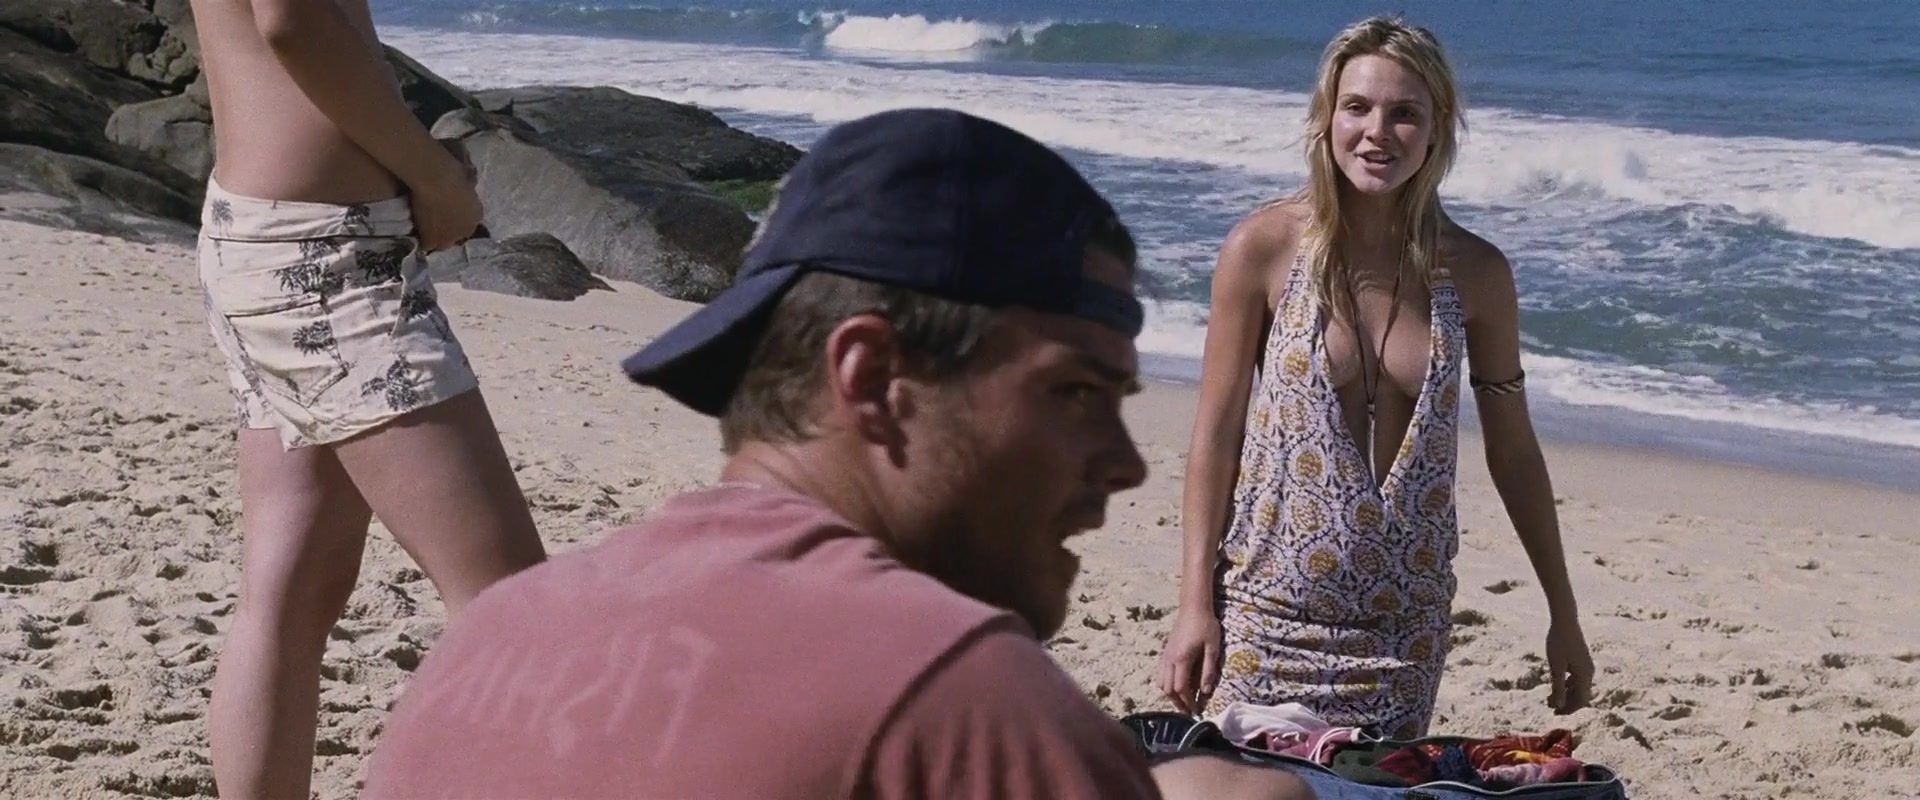 Perfect Porn Nude Topless Video | Celebrity: Beau Garrett, Melissa George | The movie "Turistas" | Released in 2006 Gay Largedick